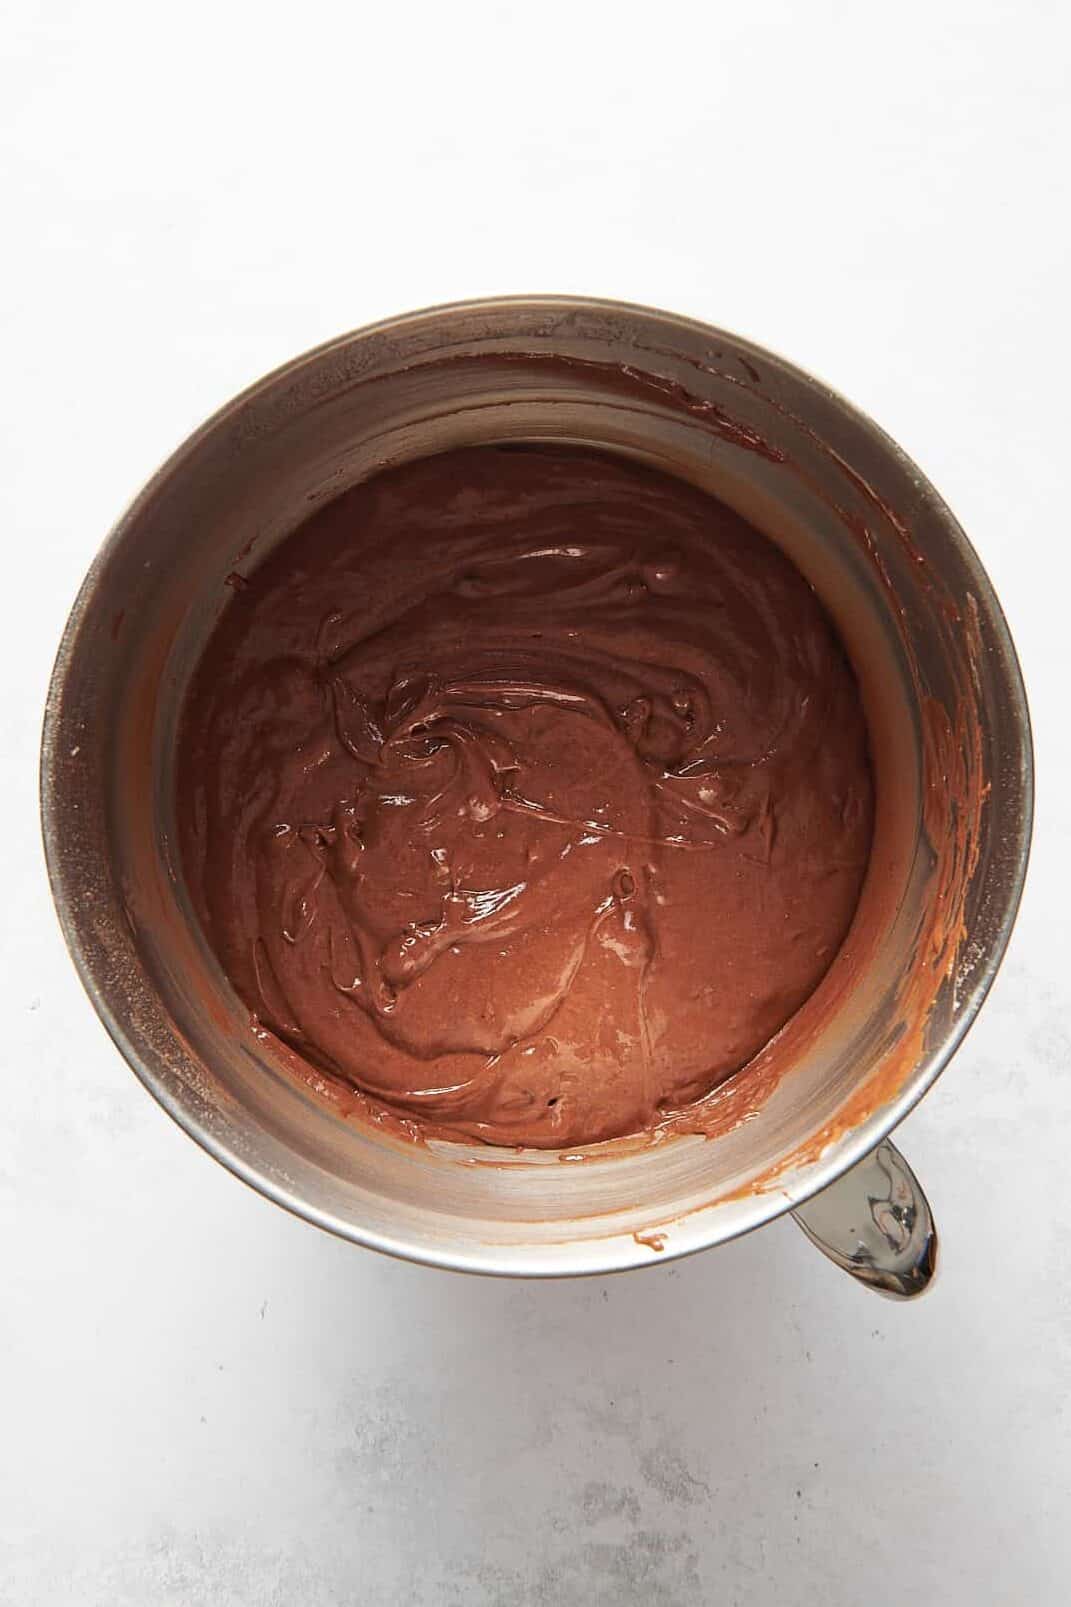 chocolate kahlua cake batter sitting in a stainless steel mixing